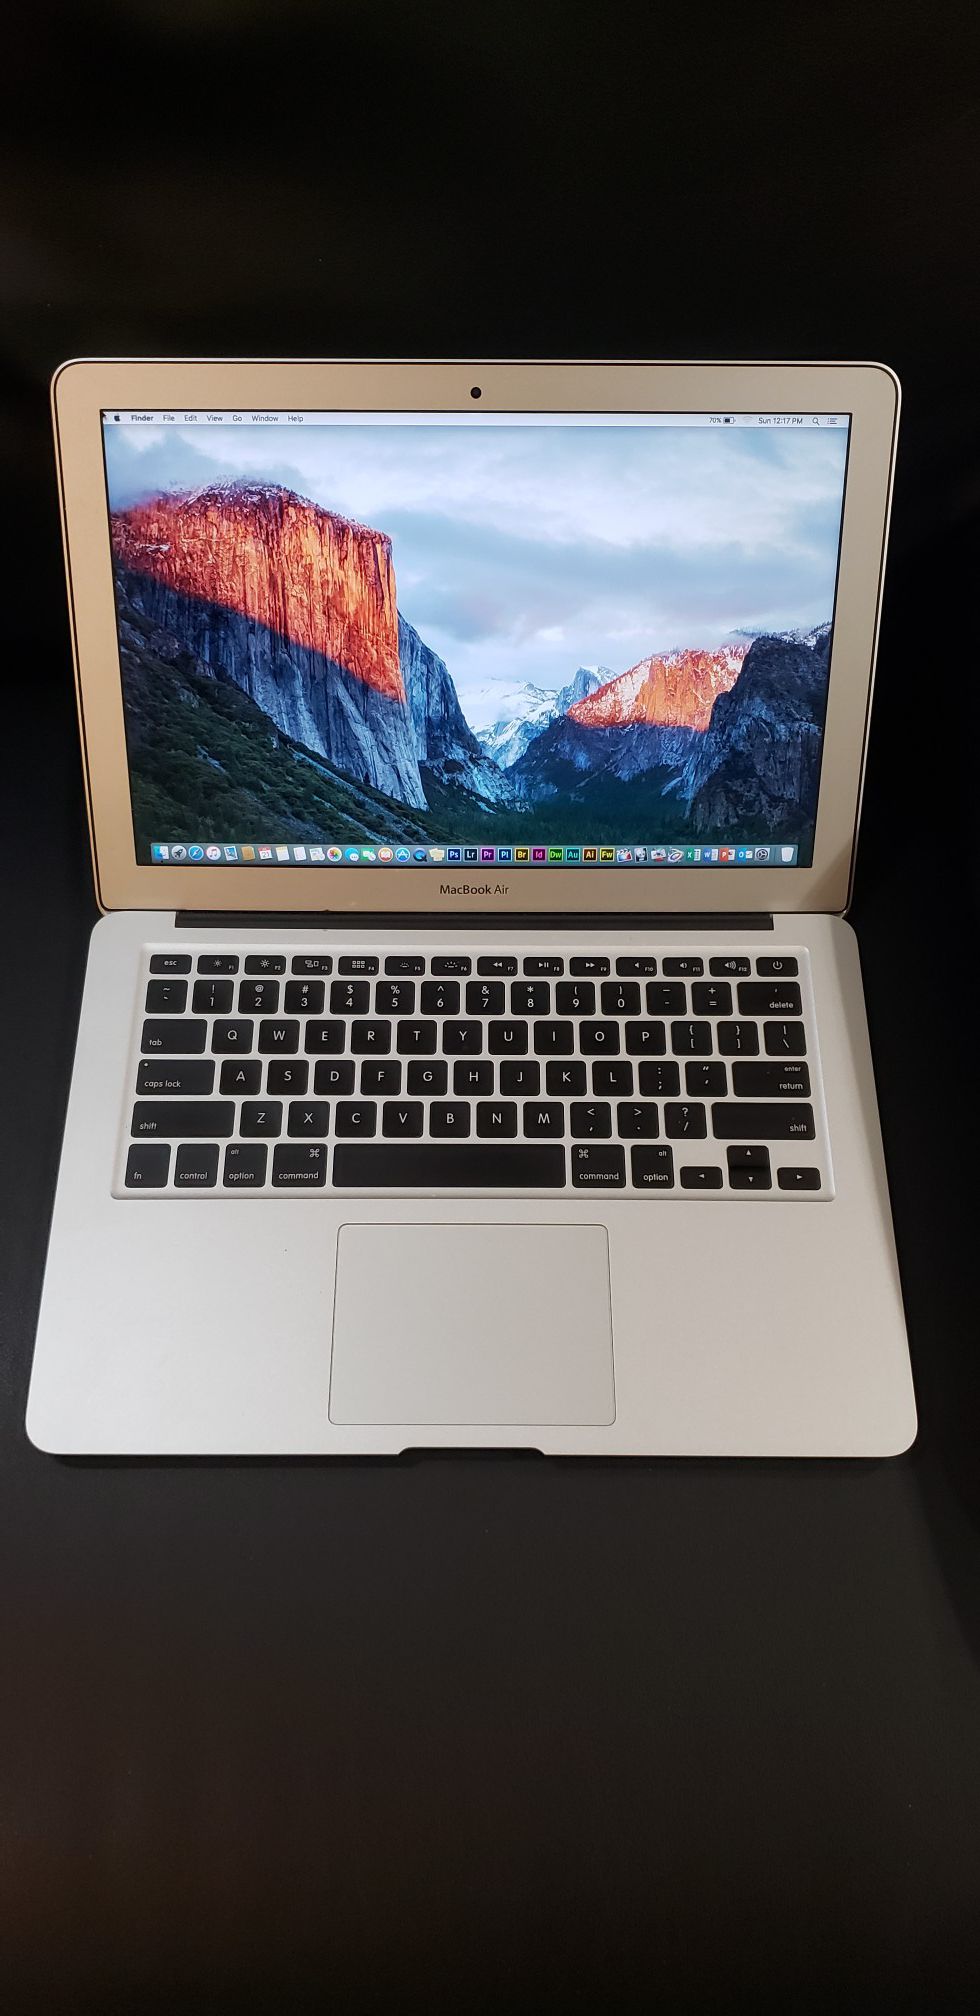 2015 Macbook Air 13 inch with over $600 in paid software for photo and video editing